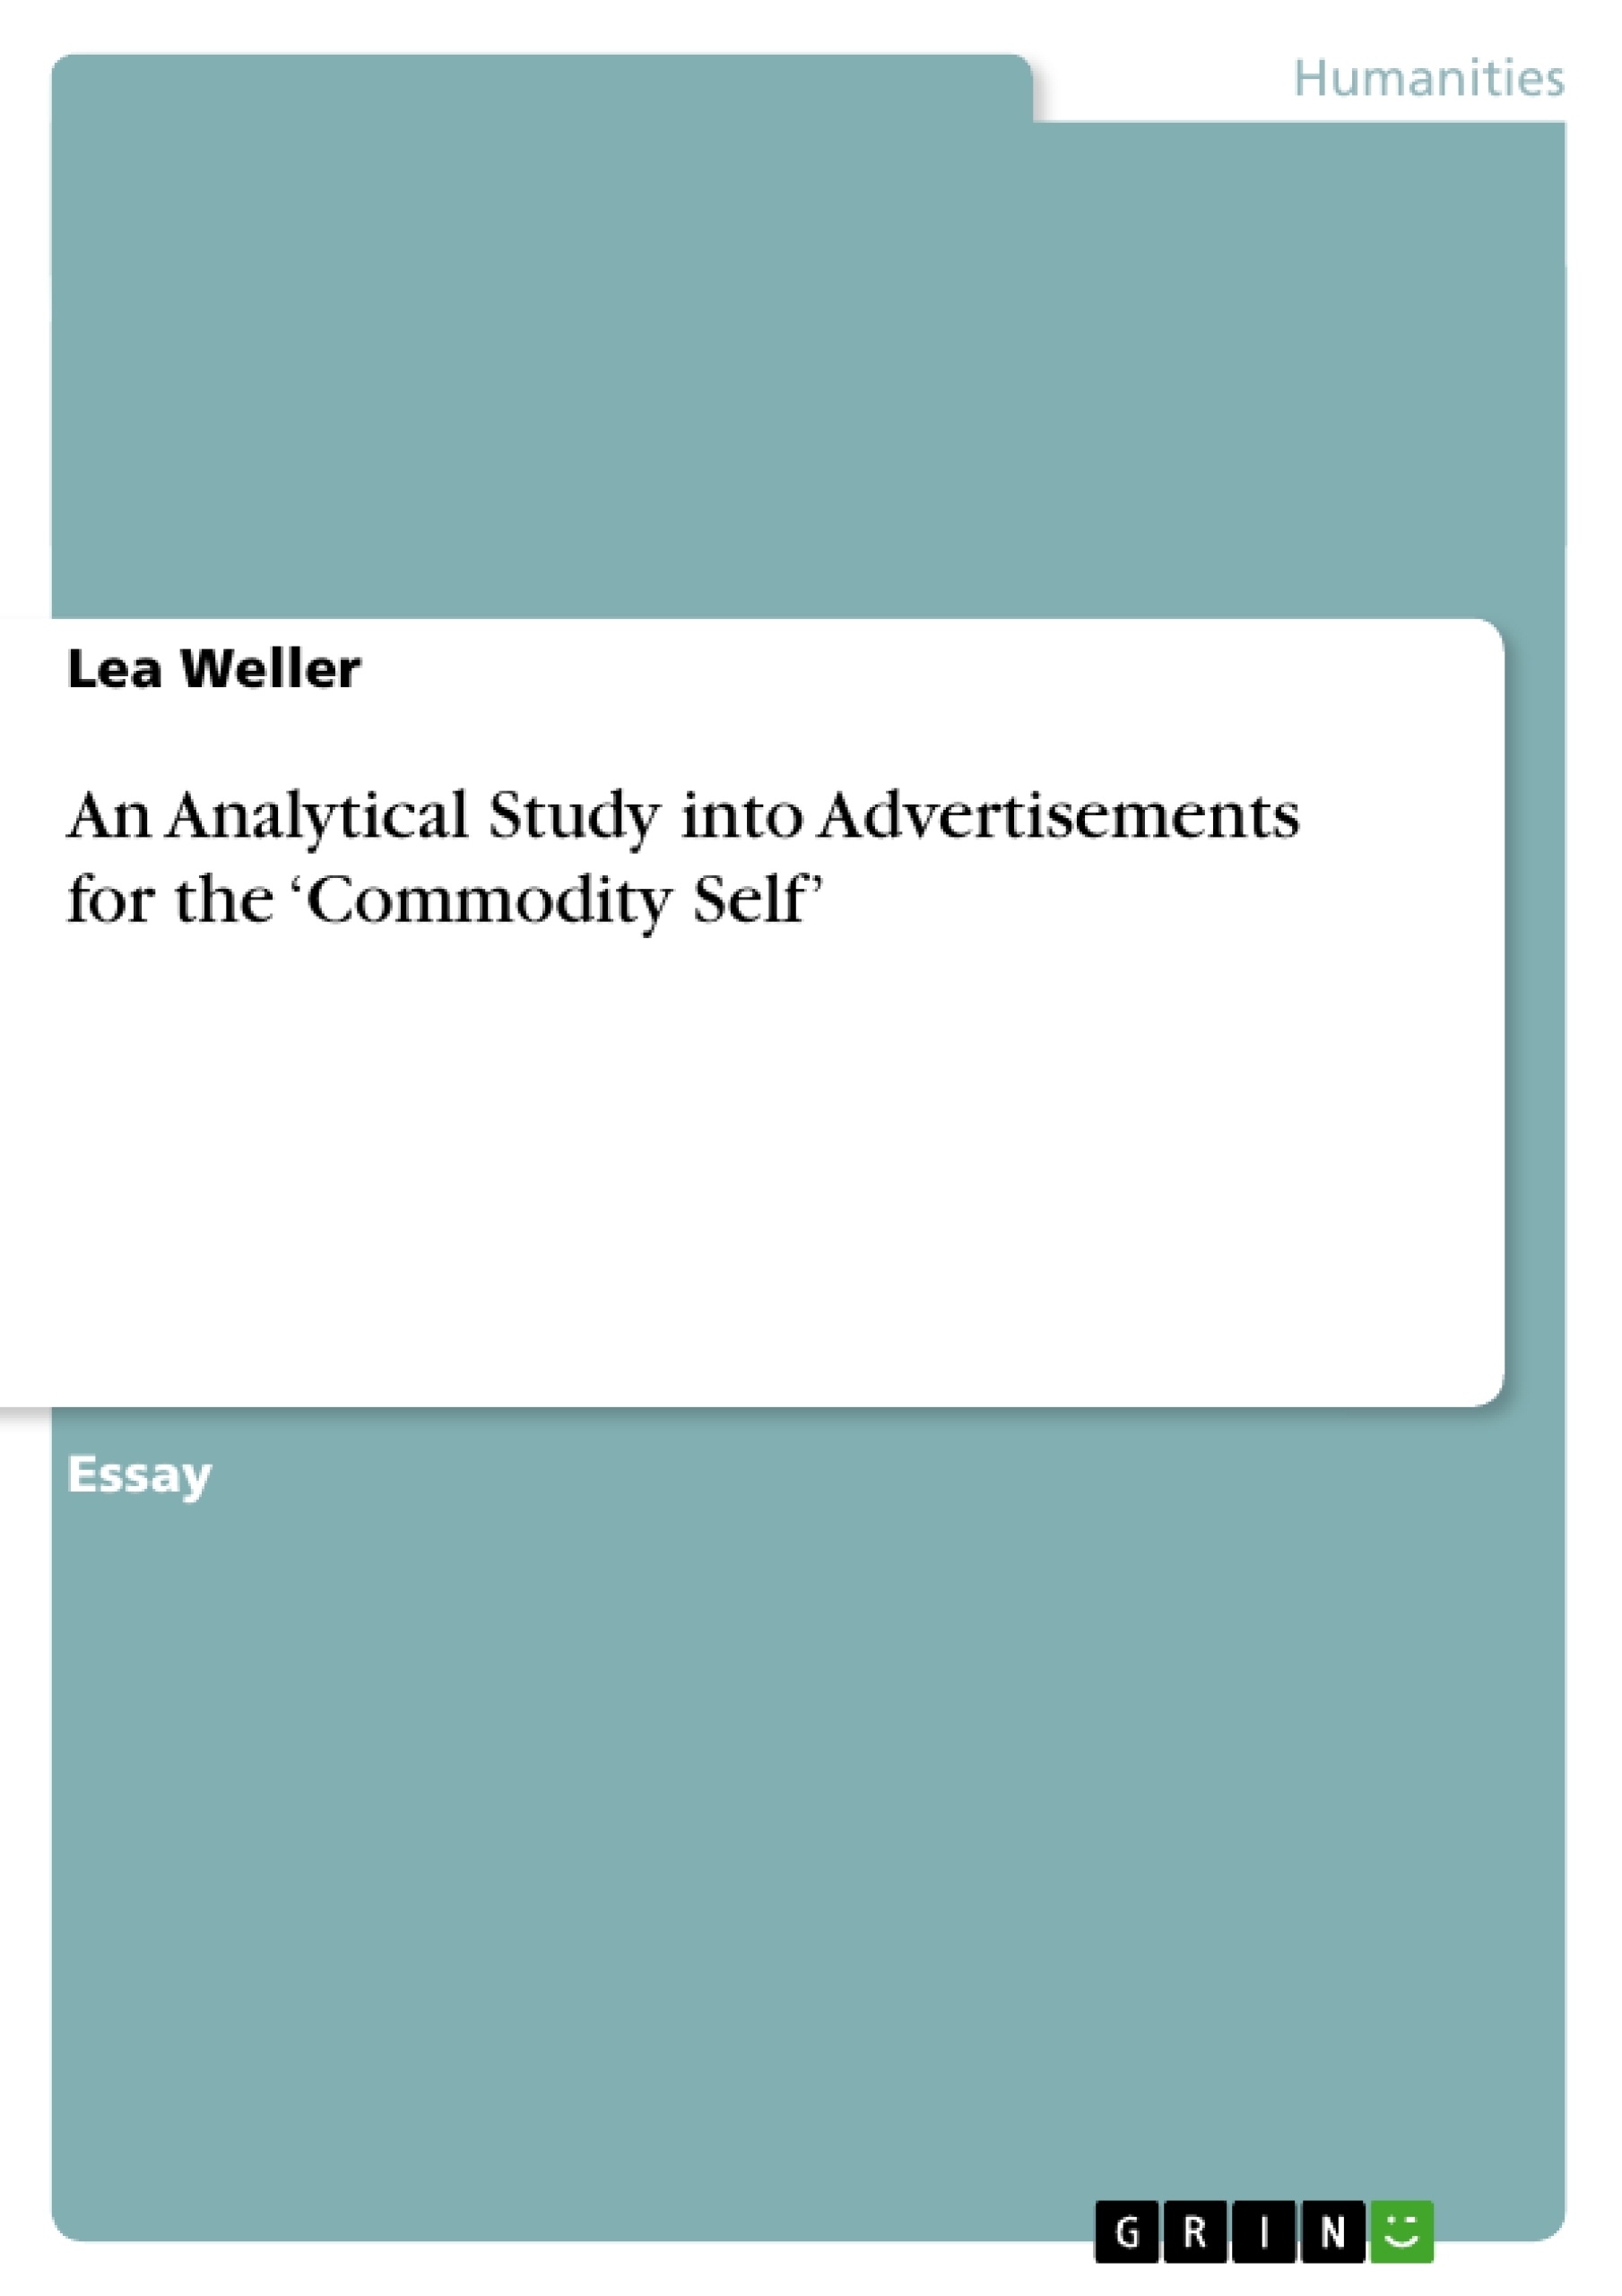 Título: An Analytical Study into Advertisements for the ‘Commodity Self’